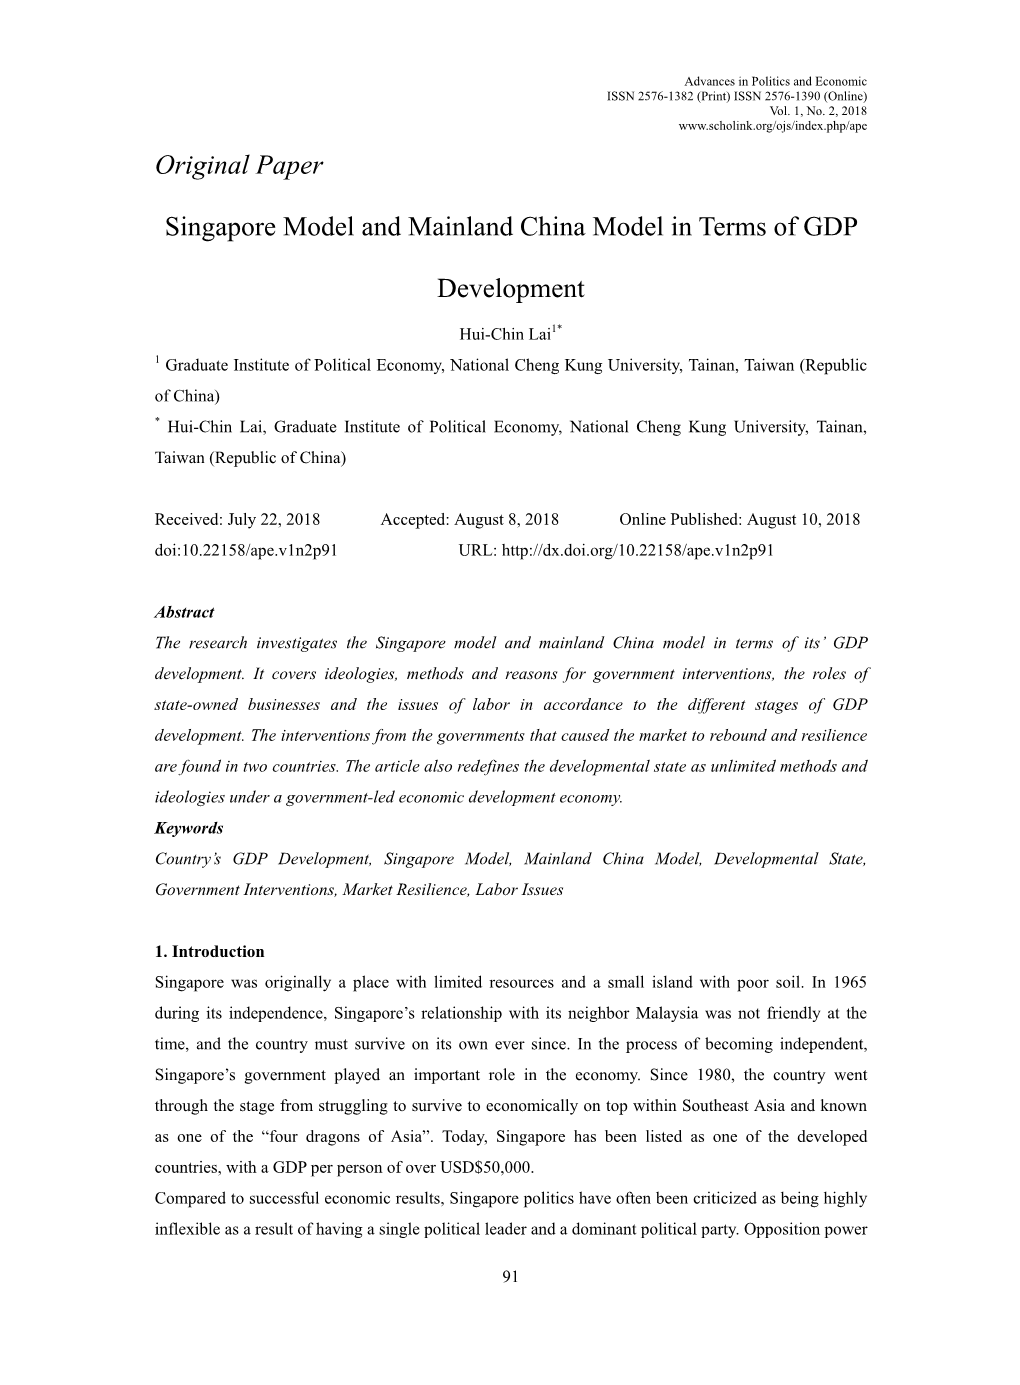 Original Paper Singapore Model and Mainland China Model in Terms Of